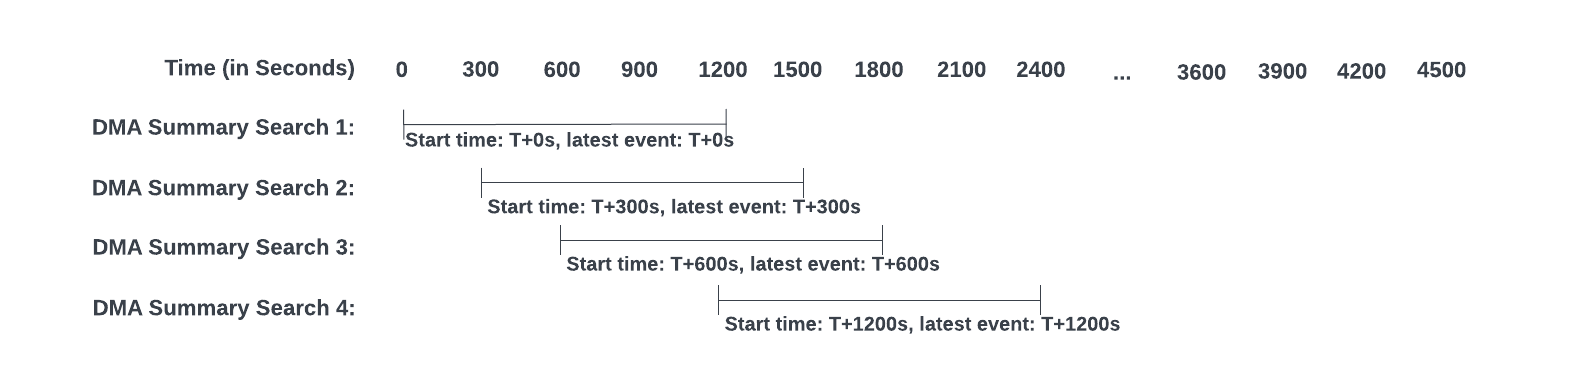 This diagram shows timelines for the first four summarization searches for a data model that has the default acceleration settings. The first search runs for 20 minutes. The second search starts 5 minutes after the first search and also runs for 20 minutes. The third search starts five minutes after the second search and also runs for 20 minutes. The fourth search must wait for the first search to complete, but this means that it starts only 10 minutes after the third search, and will only take 10 more minutes to complete.